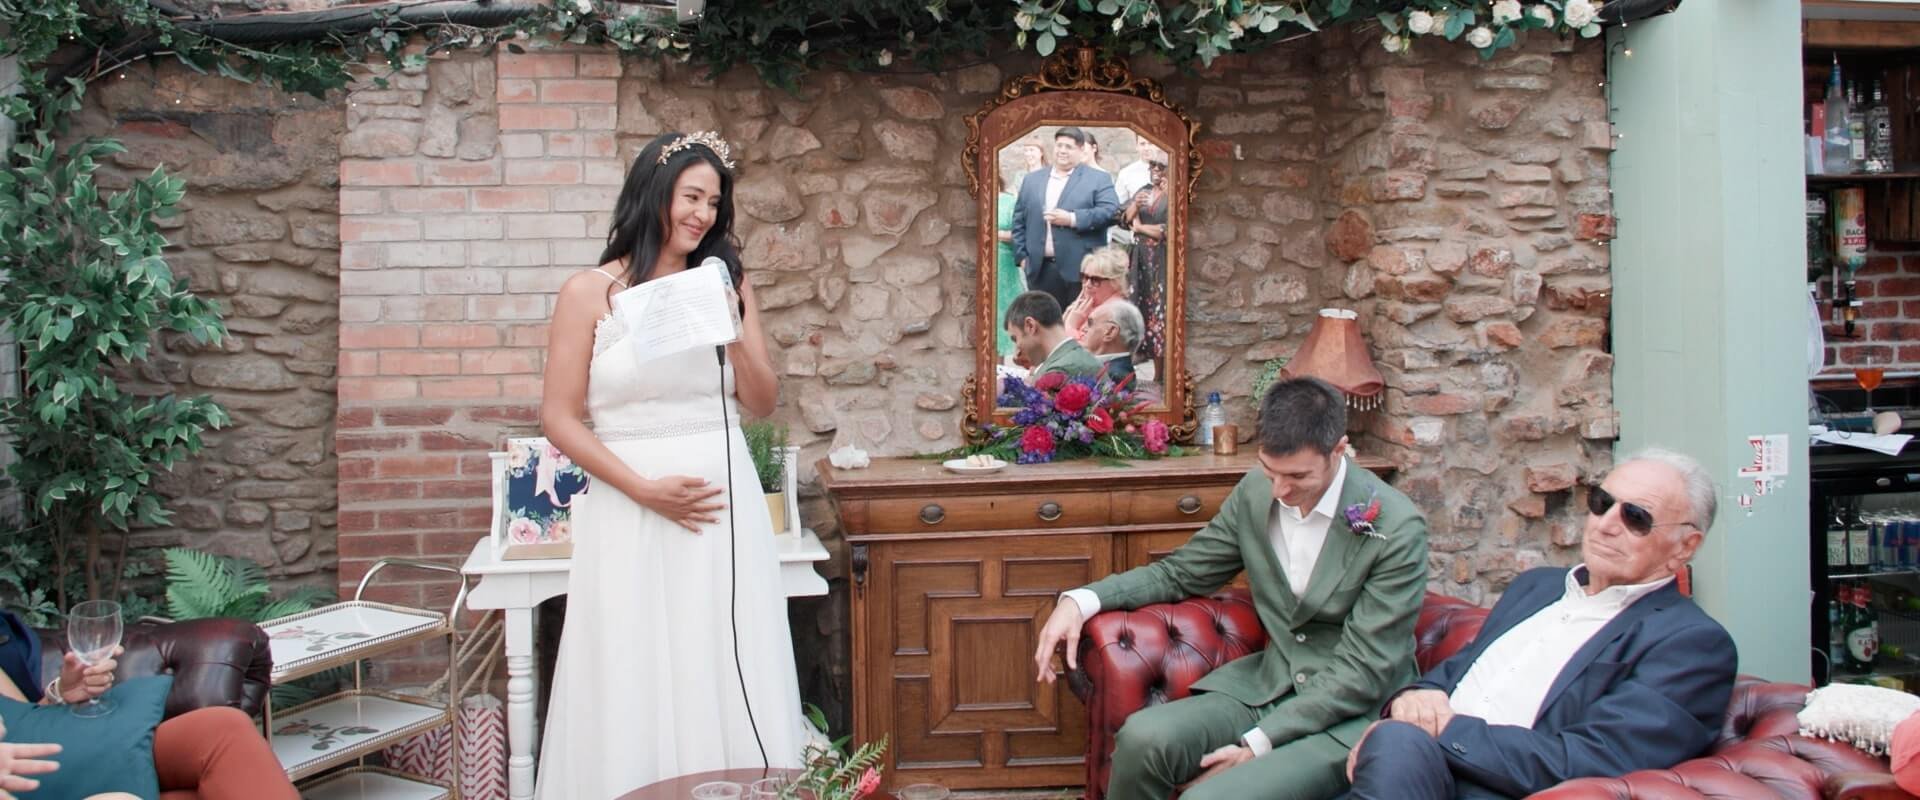 The moment the bride announced she was pregnant at the wedding. The groom sheds a tear.